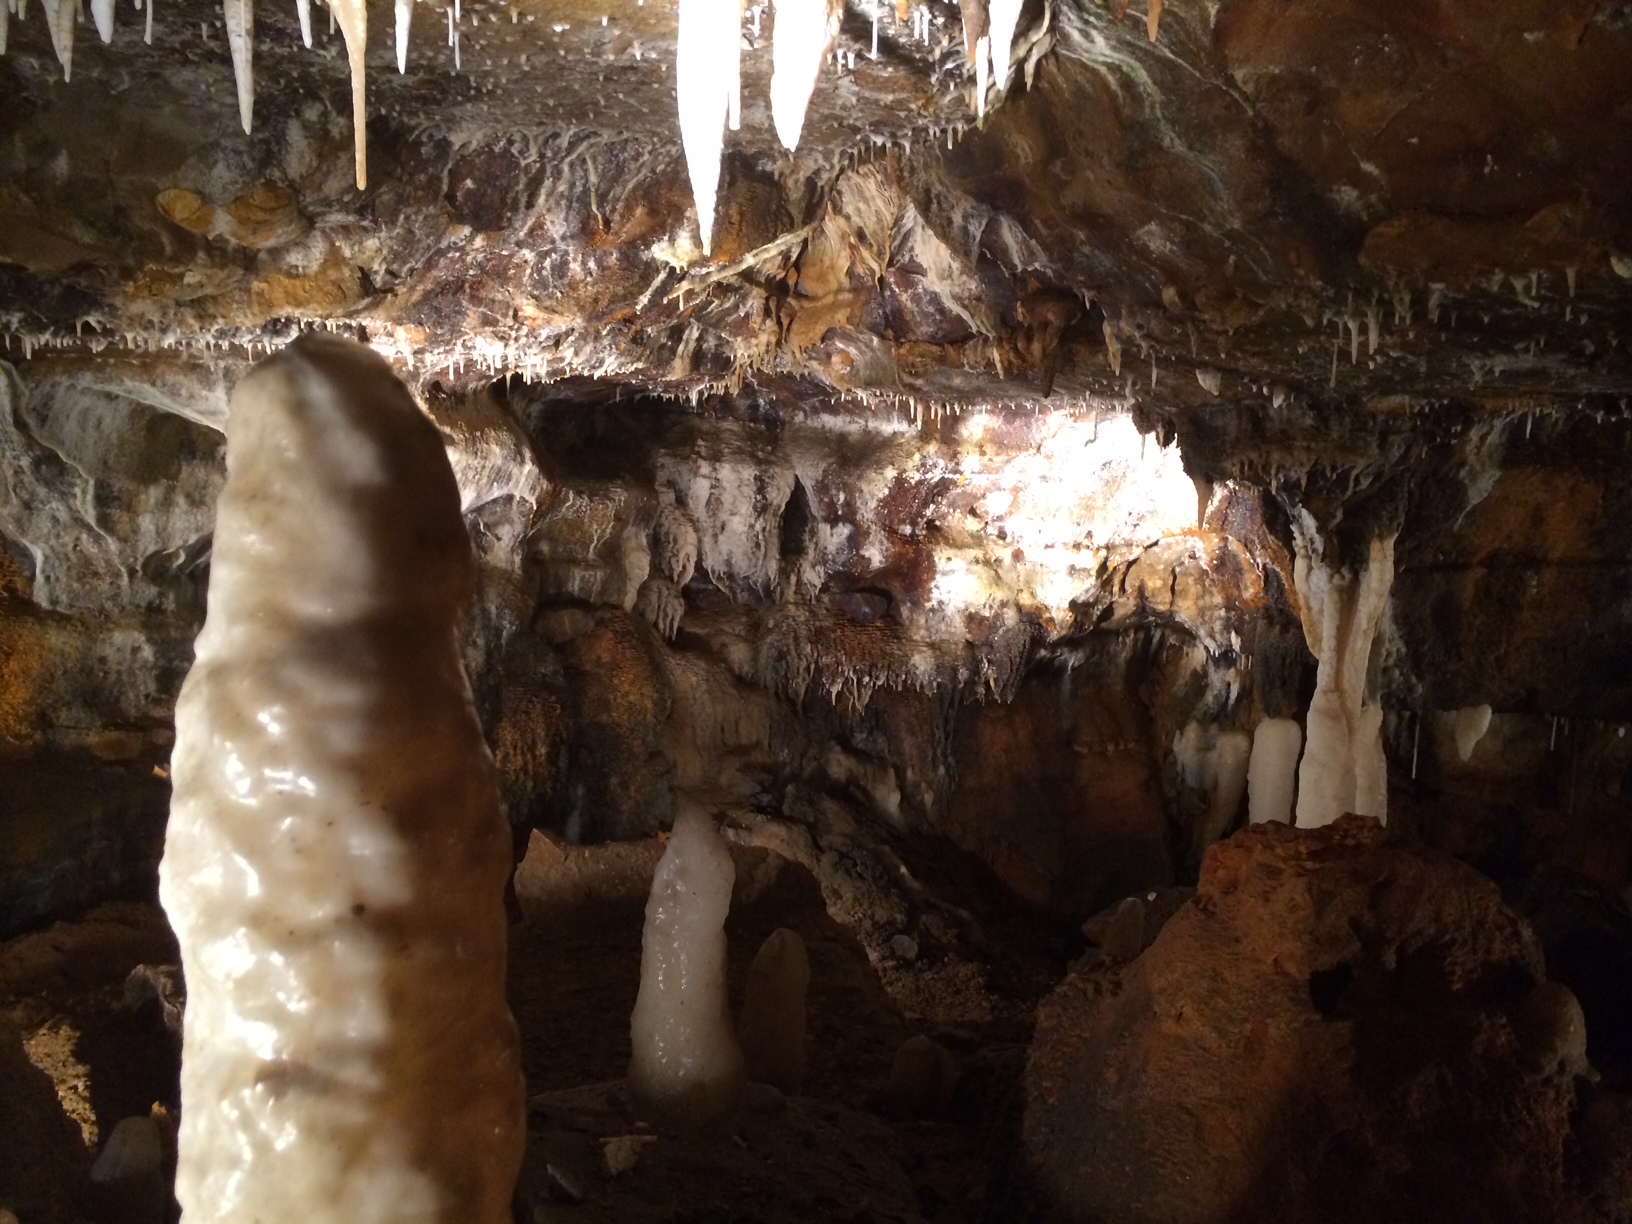 It's not just you. The stalagmites do look a bit like penises.